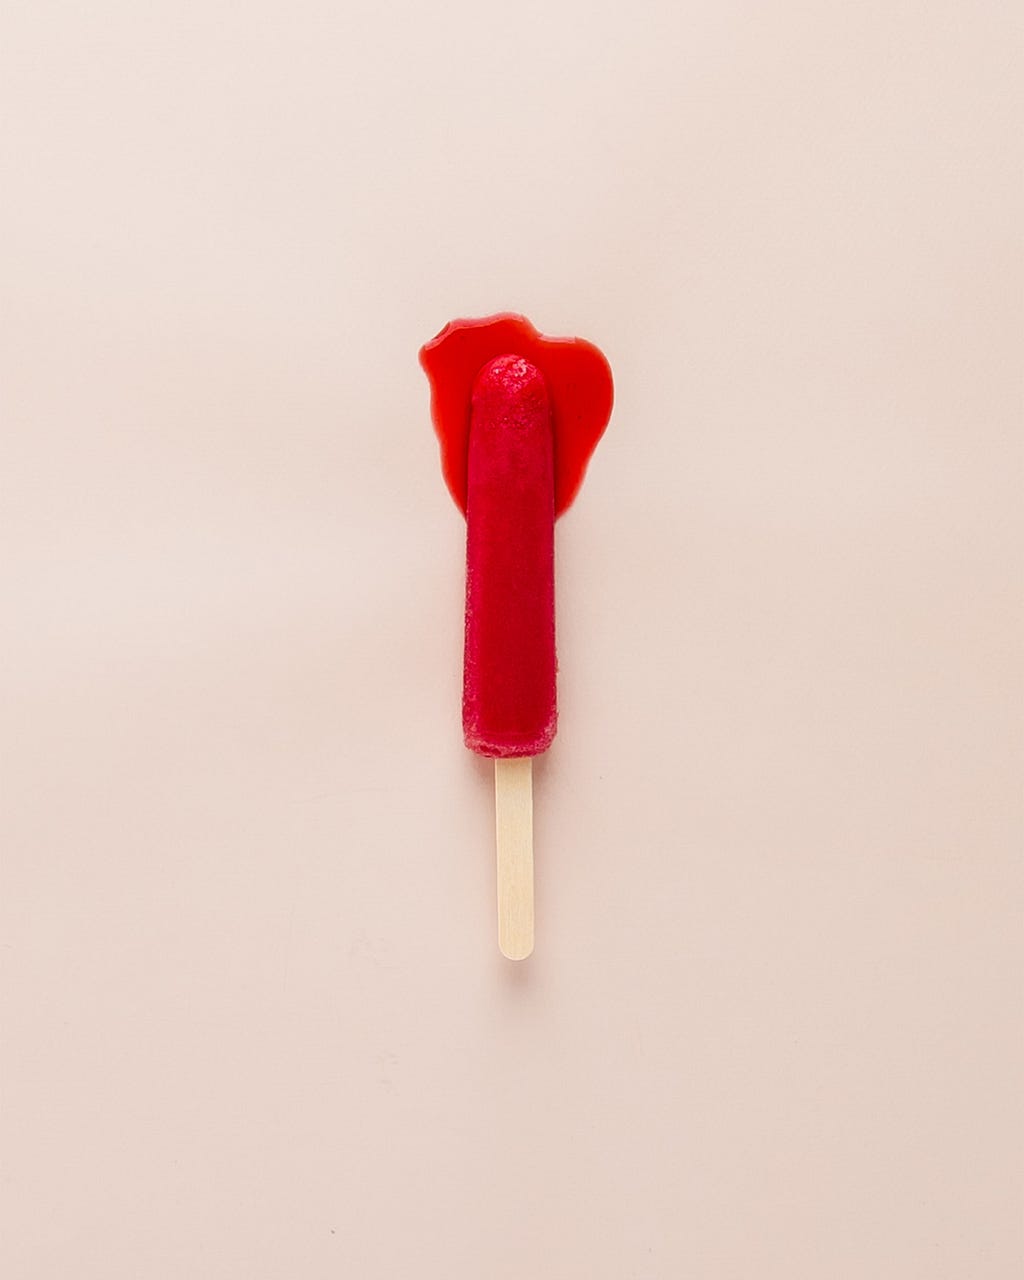 A melting red popsicle resmbling a used tampon